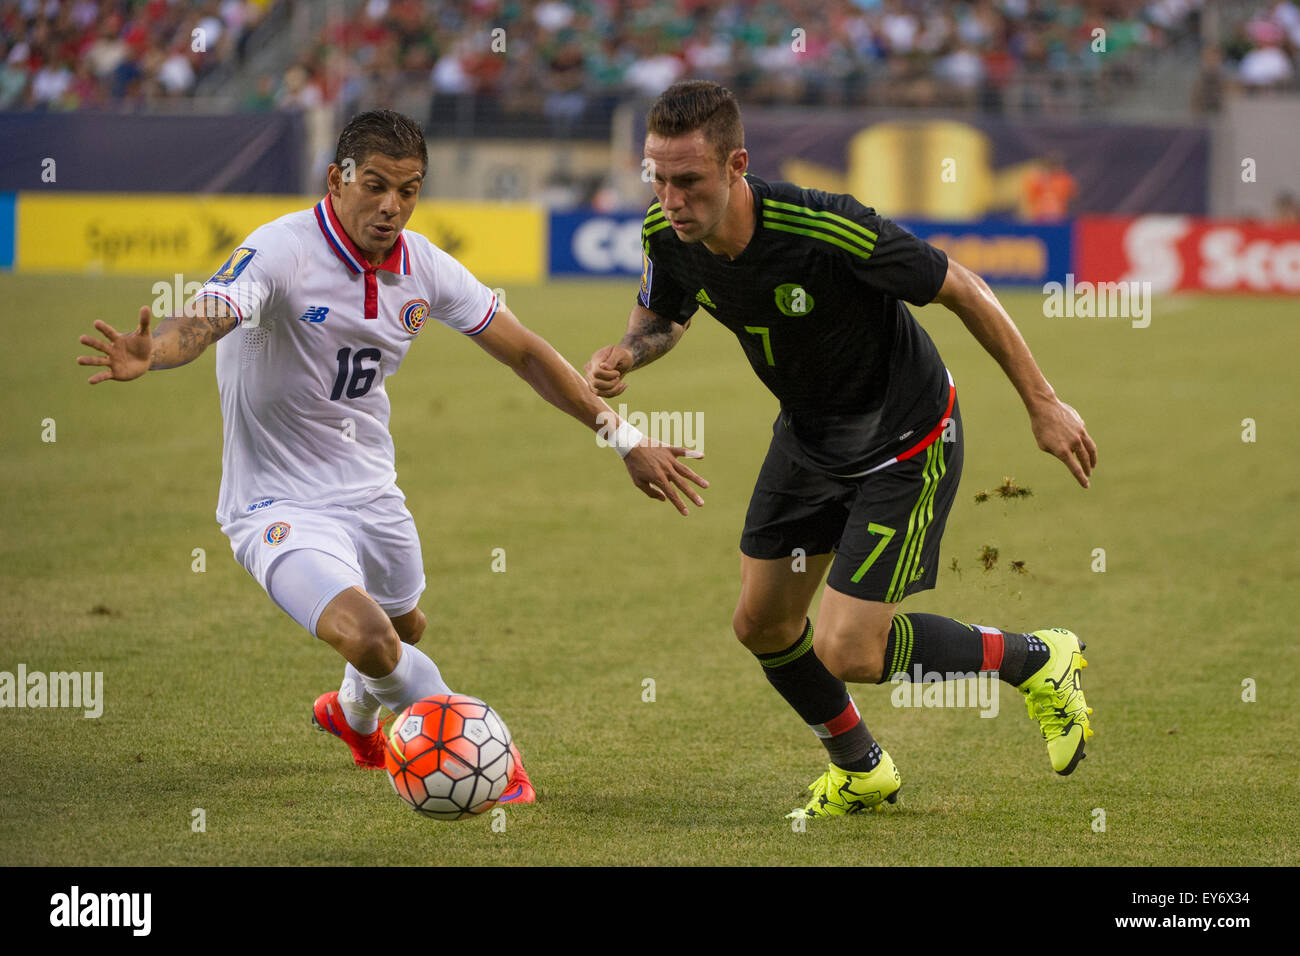 Extra Time. 19th July, 2015. Costa Rica defender Christian Gamboa (16) and Mexico defender miguel layun (7) chase the ball during the quarter-finals of The CONCACAF Gold Cup match between Mexico and Costa Rica at Met Life Stadium, East Rutherford, NJ. Mexico defeated Costa Rica 1-0 in the final minute of extra time. Mandatory Credit: Kostas Lymperopoulos/CSM/Alamy Live News Stock Photo